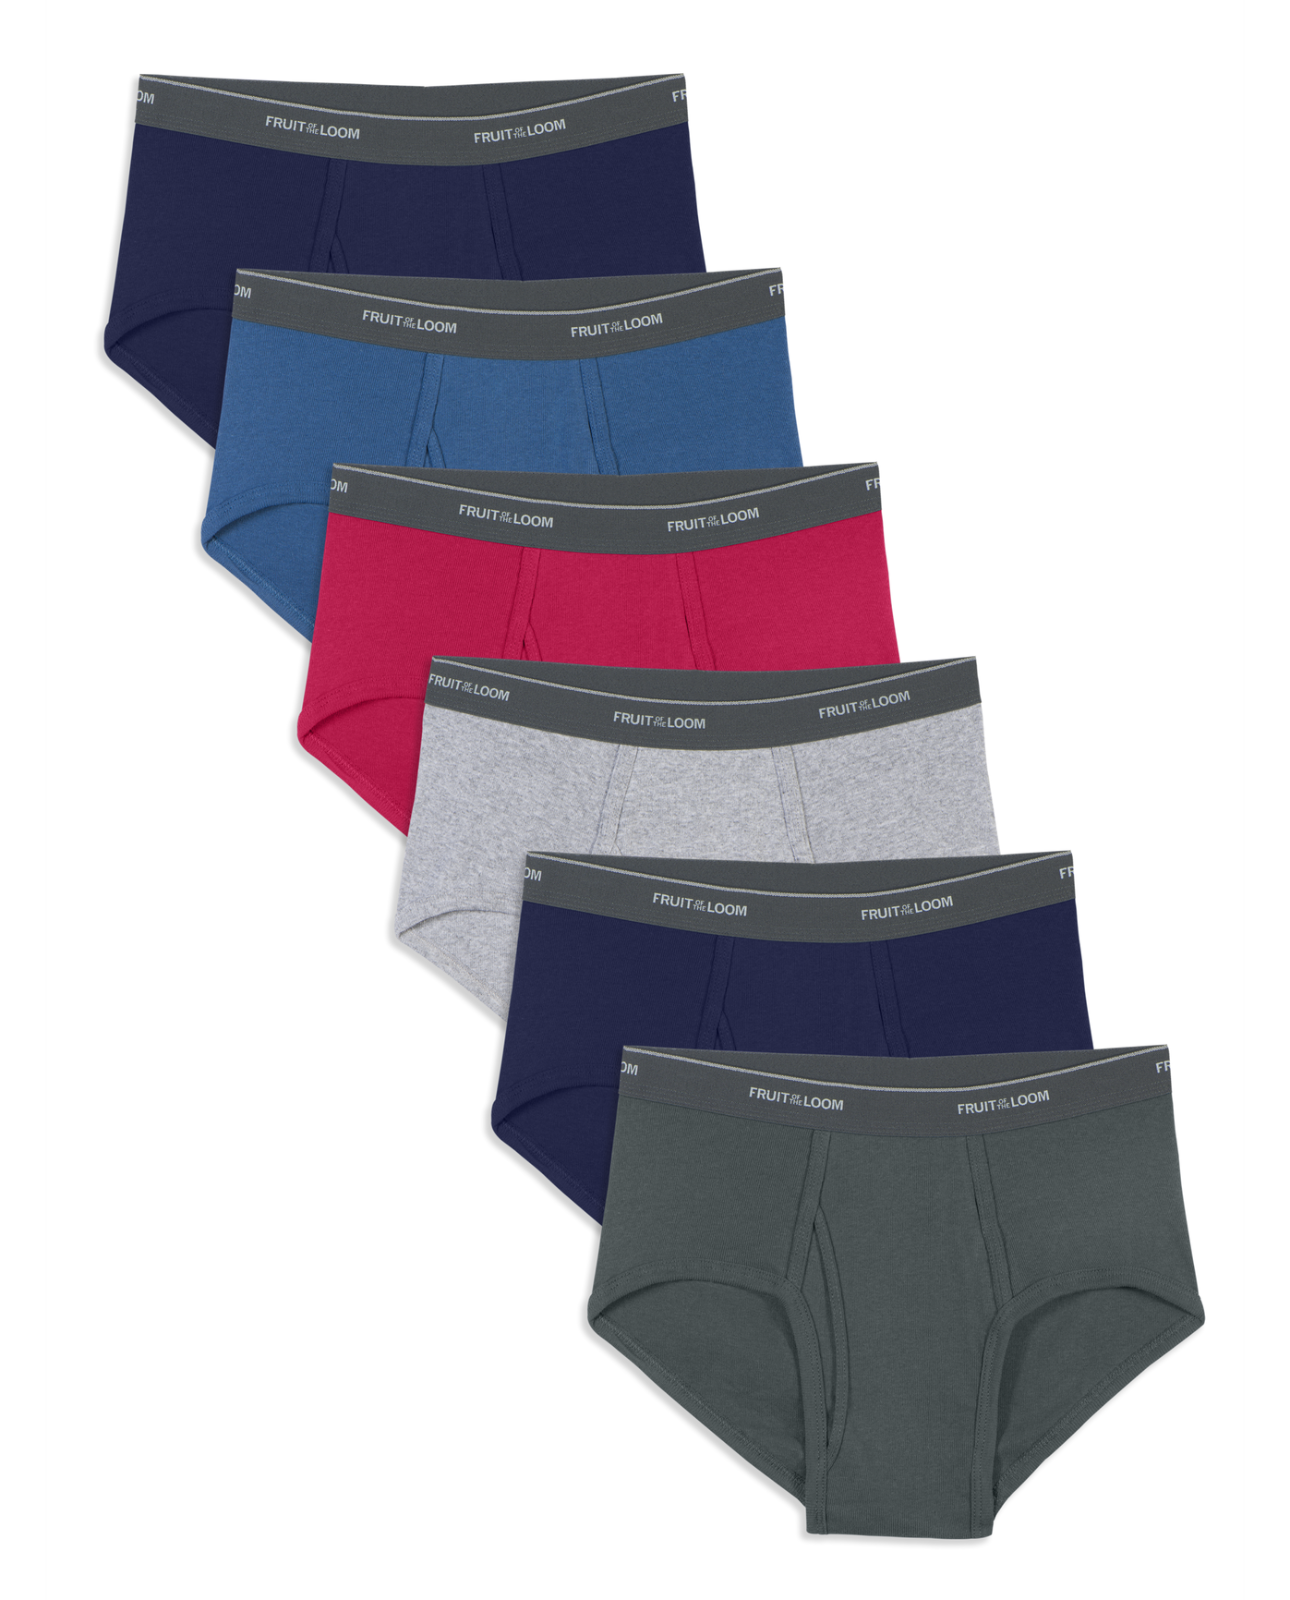 FRUIT OF THE LOOM MEN'S 6 PK or 10 PK FASHION BRIEFS  Fruit of the Loom